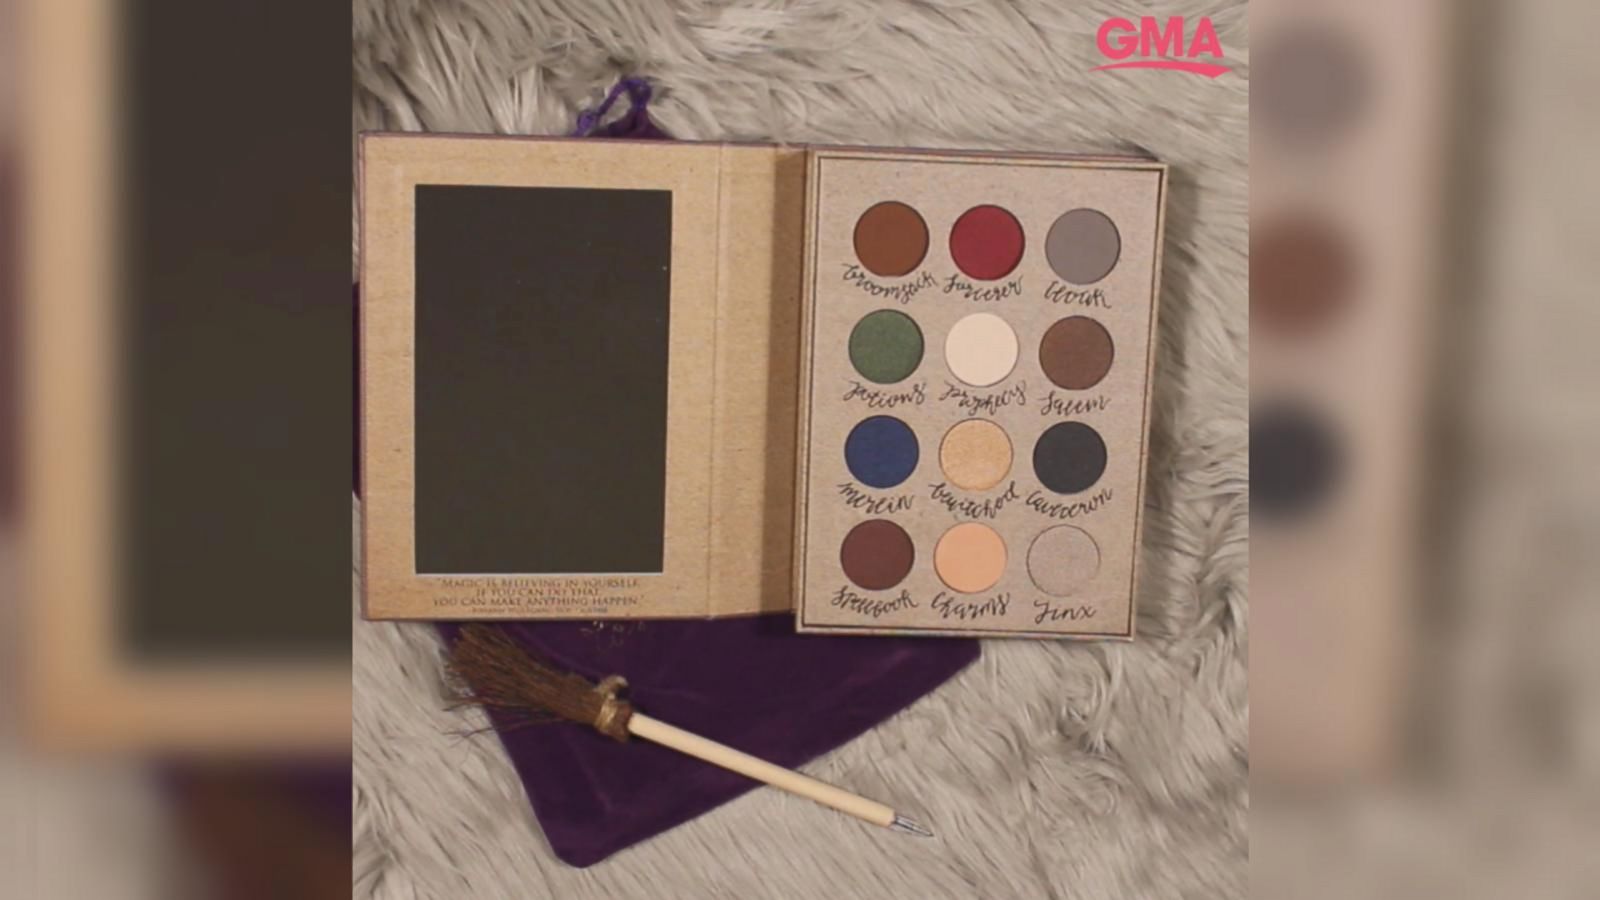 VIDEO: This makeup company creates products inspired by our favorite books and movies